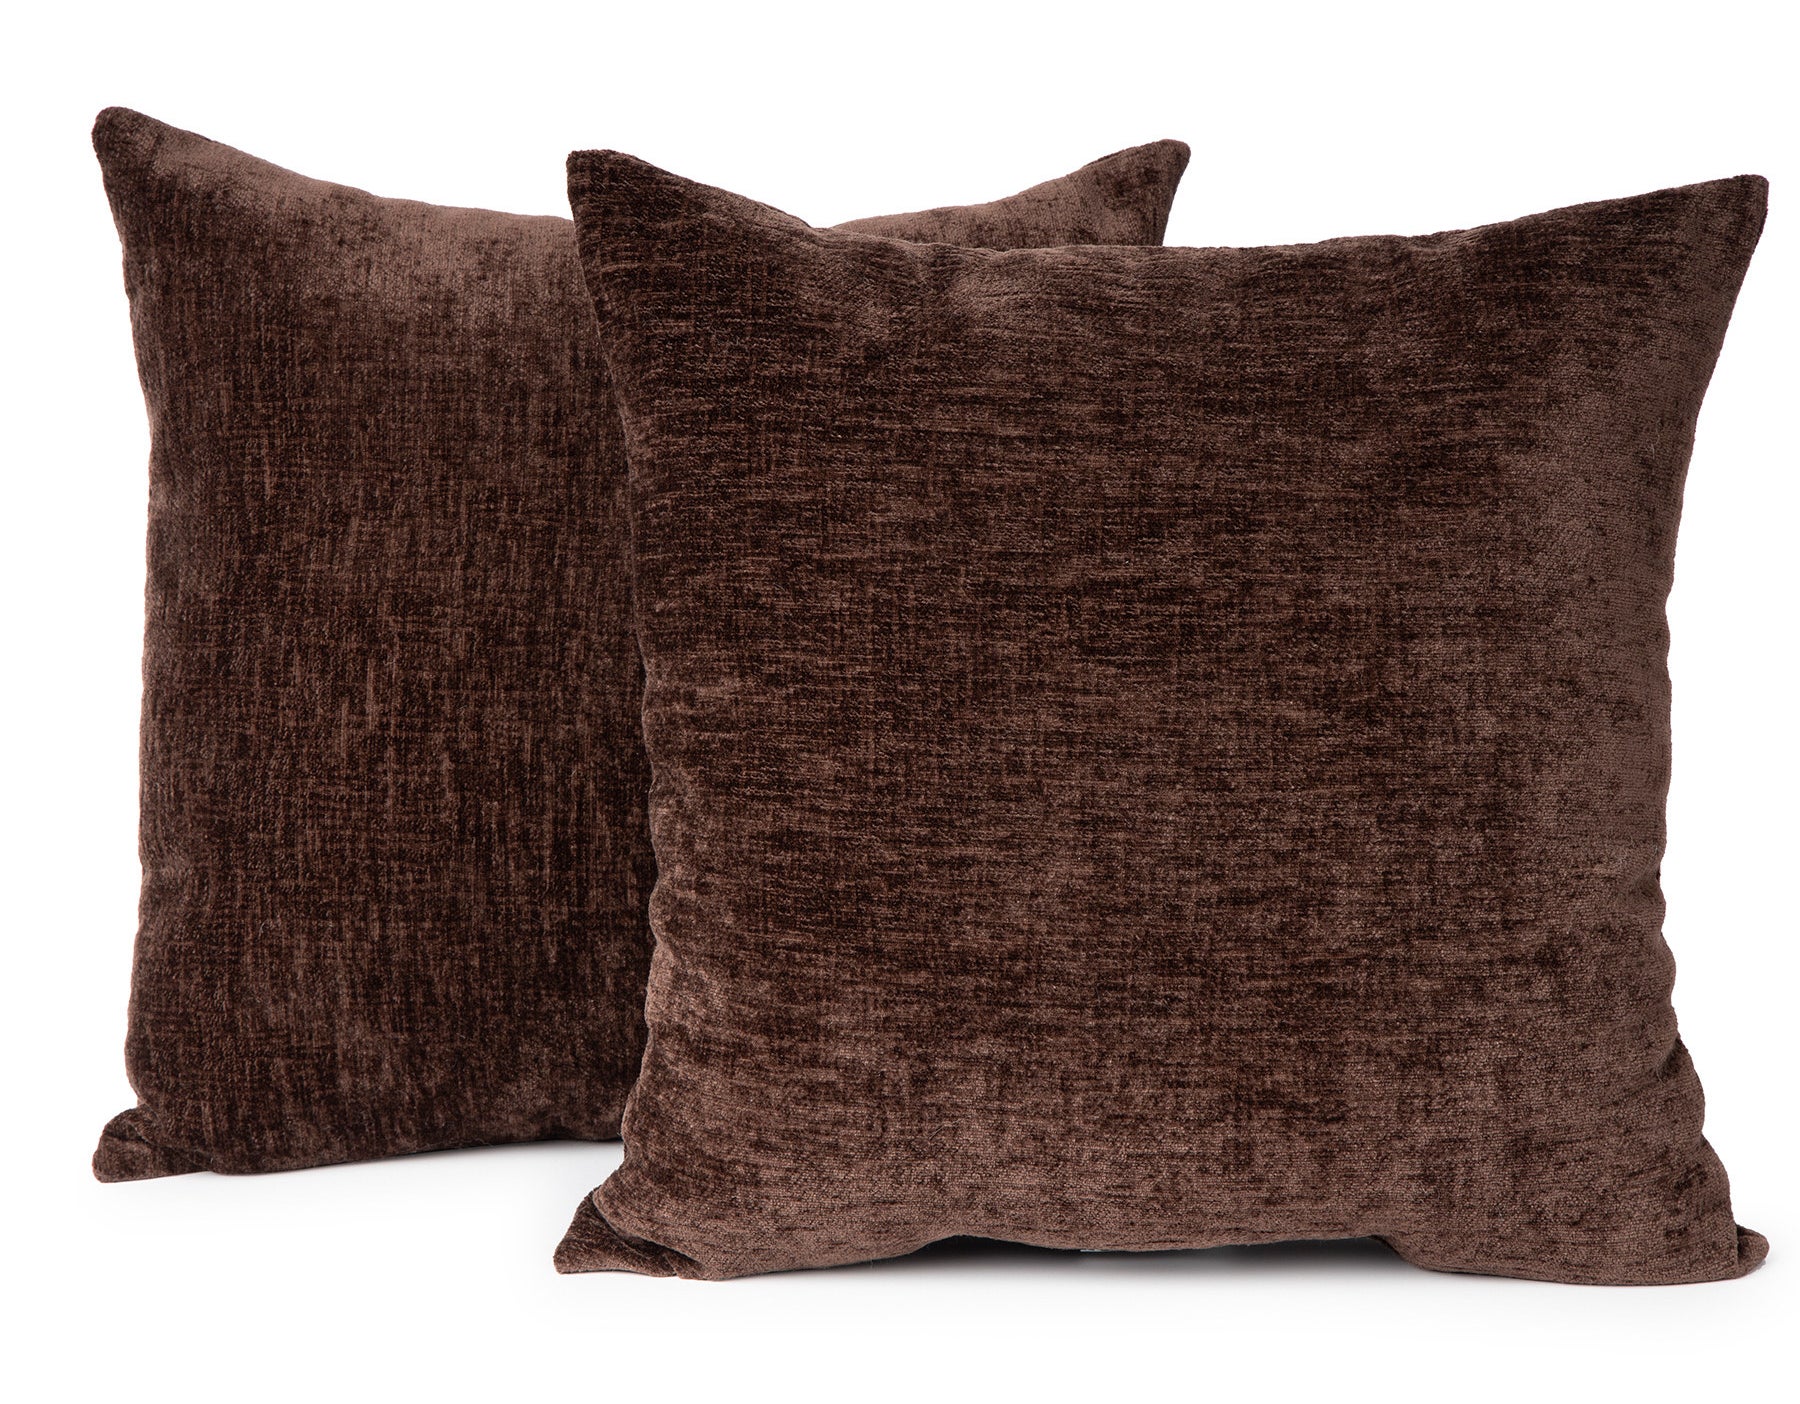 The pillows in brown